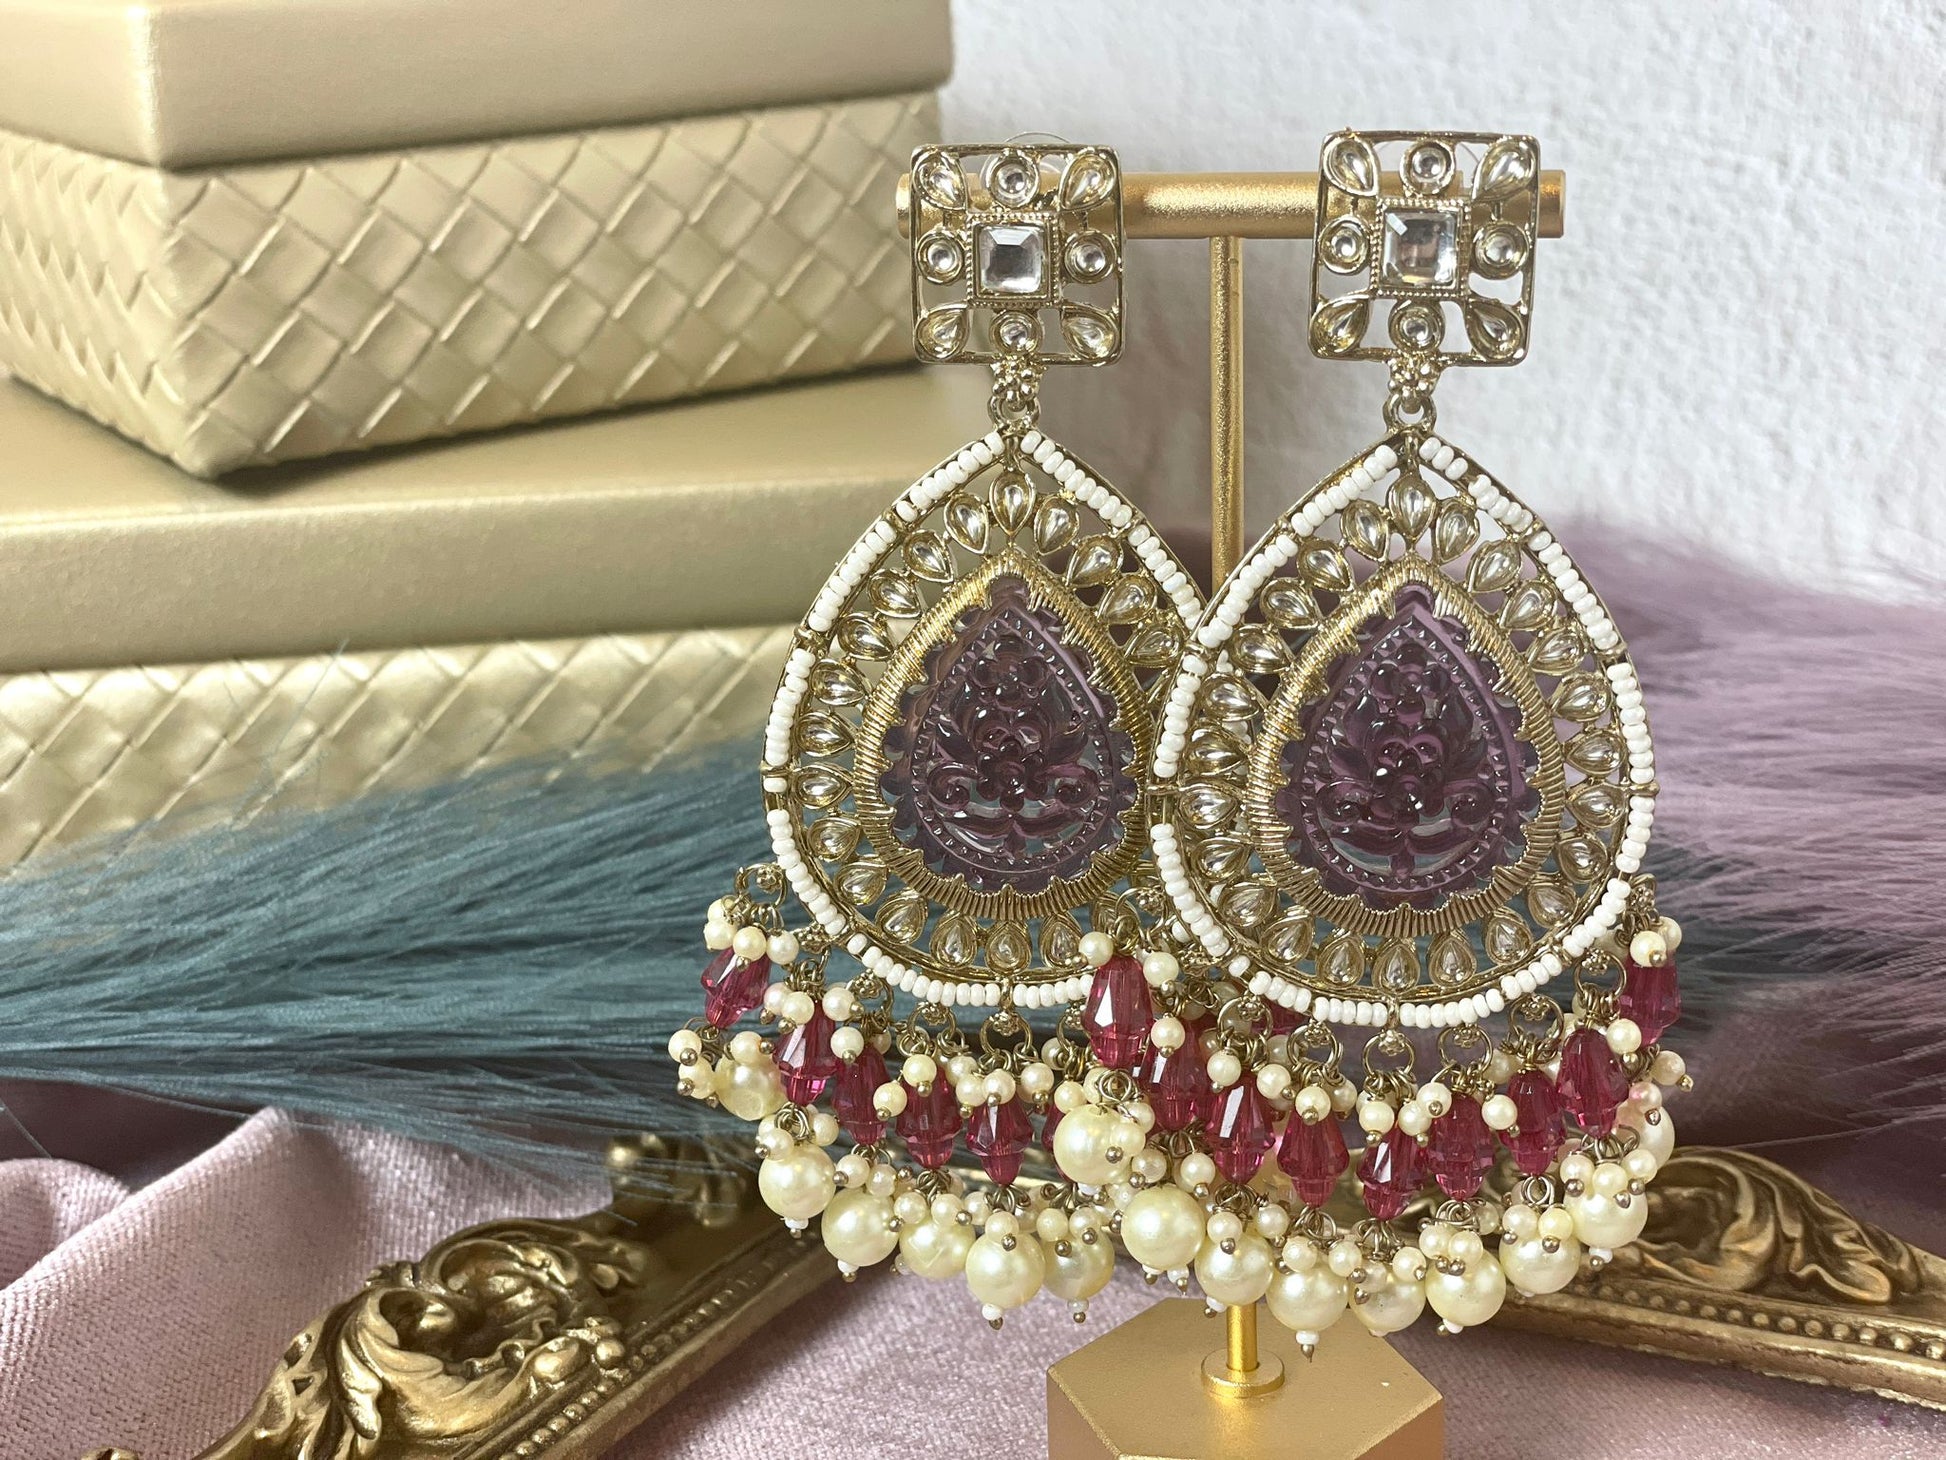 Burgundy Hoop Earrings - Trendy Accessory for a Night Out